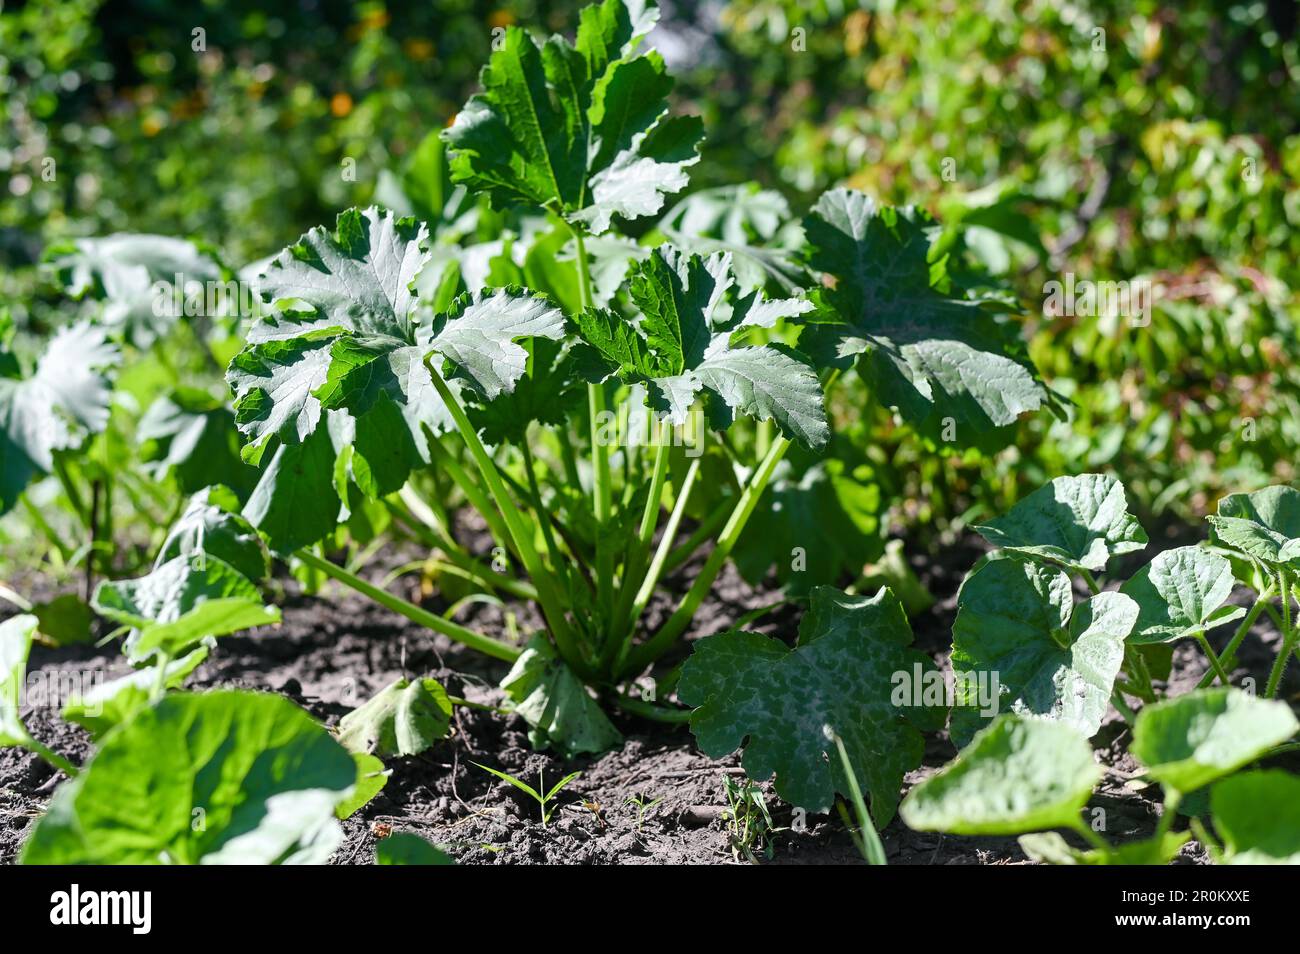 a squash plant, with beautiful large leaves. before the appearance of zucchini fruits. Stock Photo